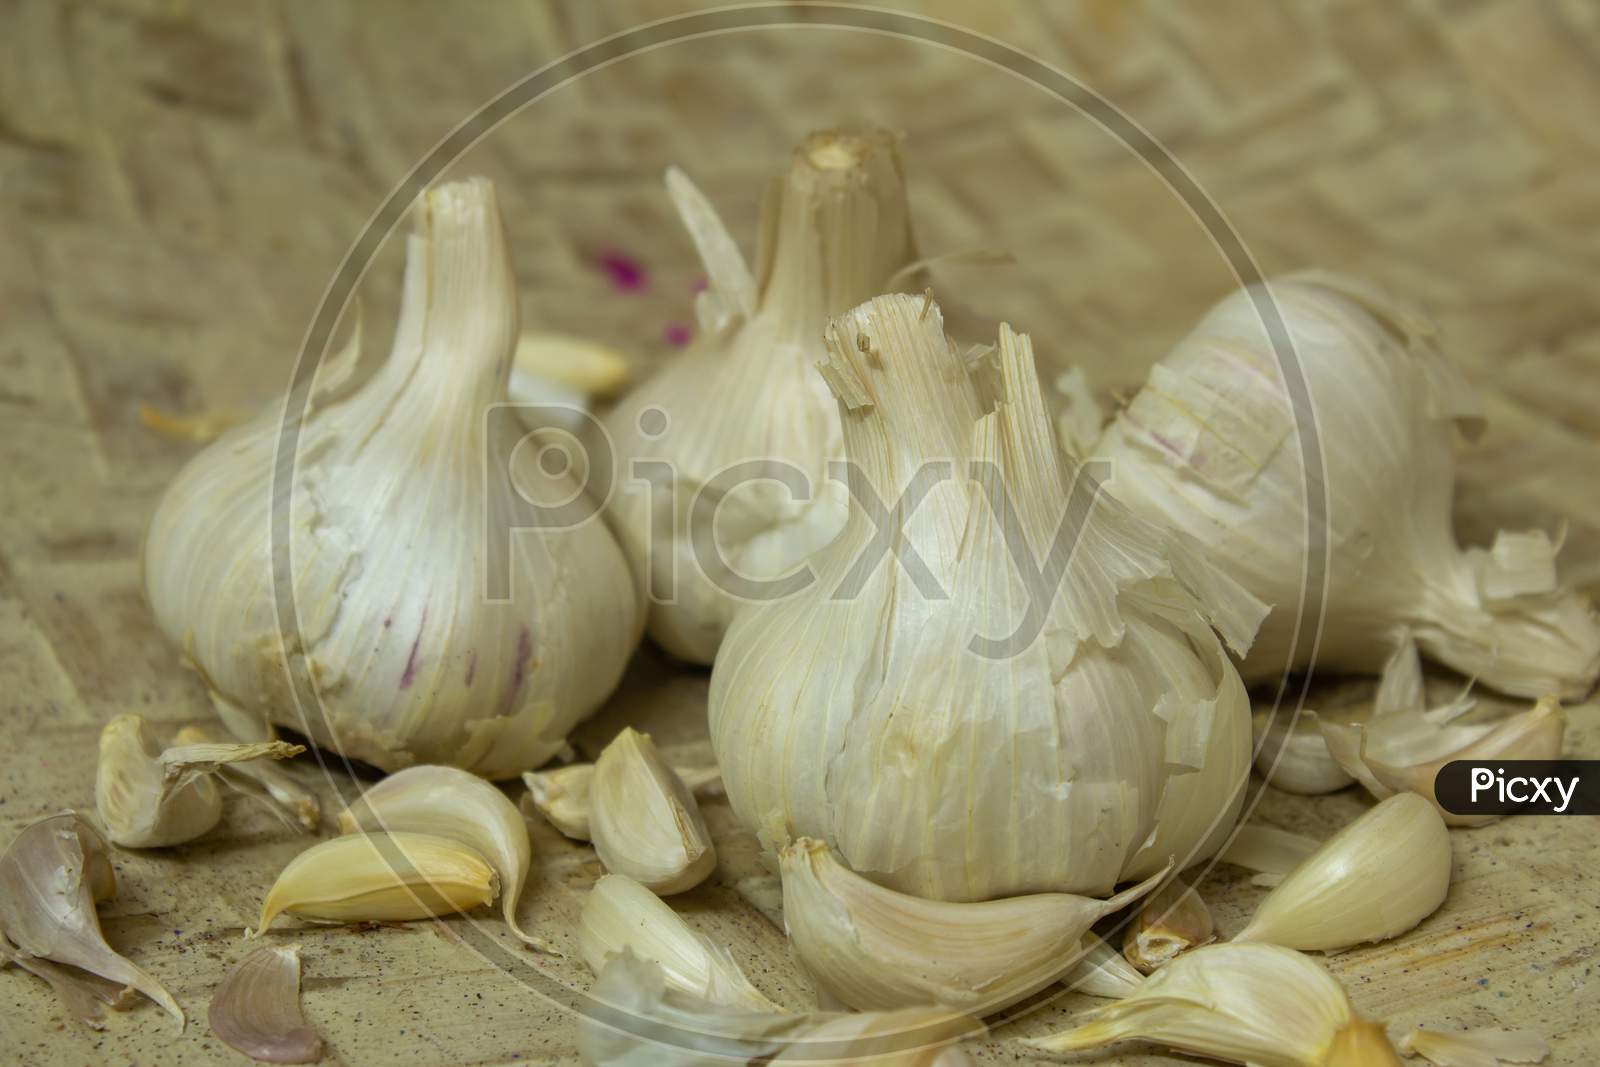 View Of Broken Down Garlic Pieces And The Whole Ones. Garlic Helps Build Immunity Against Cold And Flu.